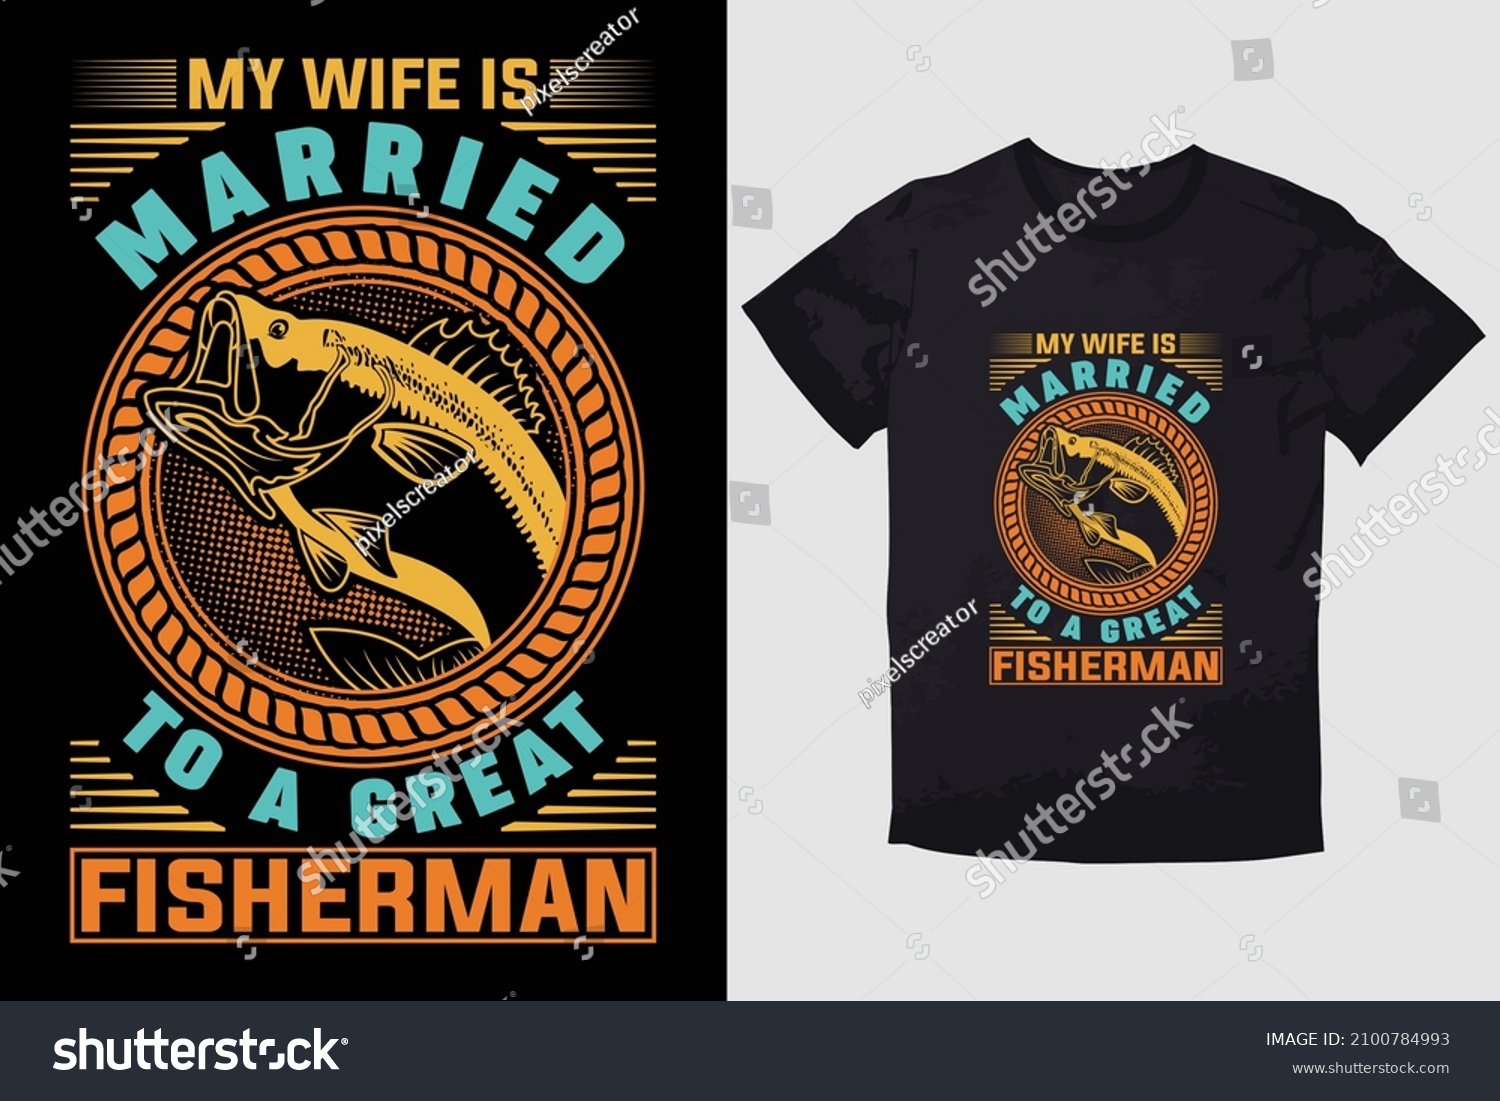 SVG of FISHING T-SHIRT MY WIFE IS MARRIED TO A GREAT FISHERMAN svg